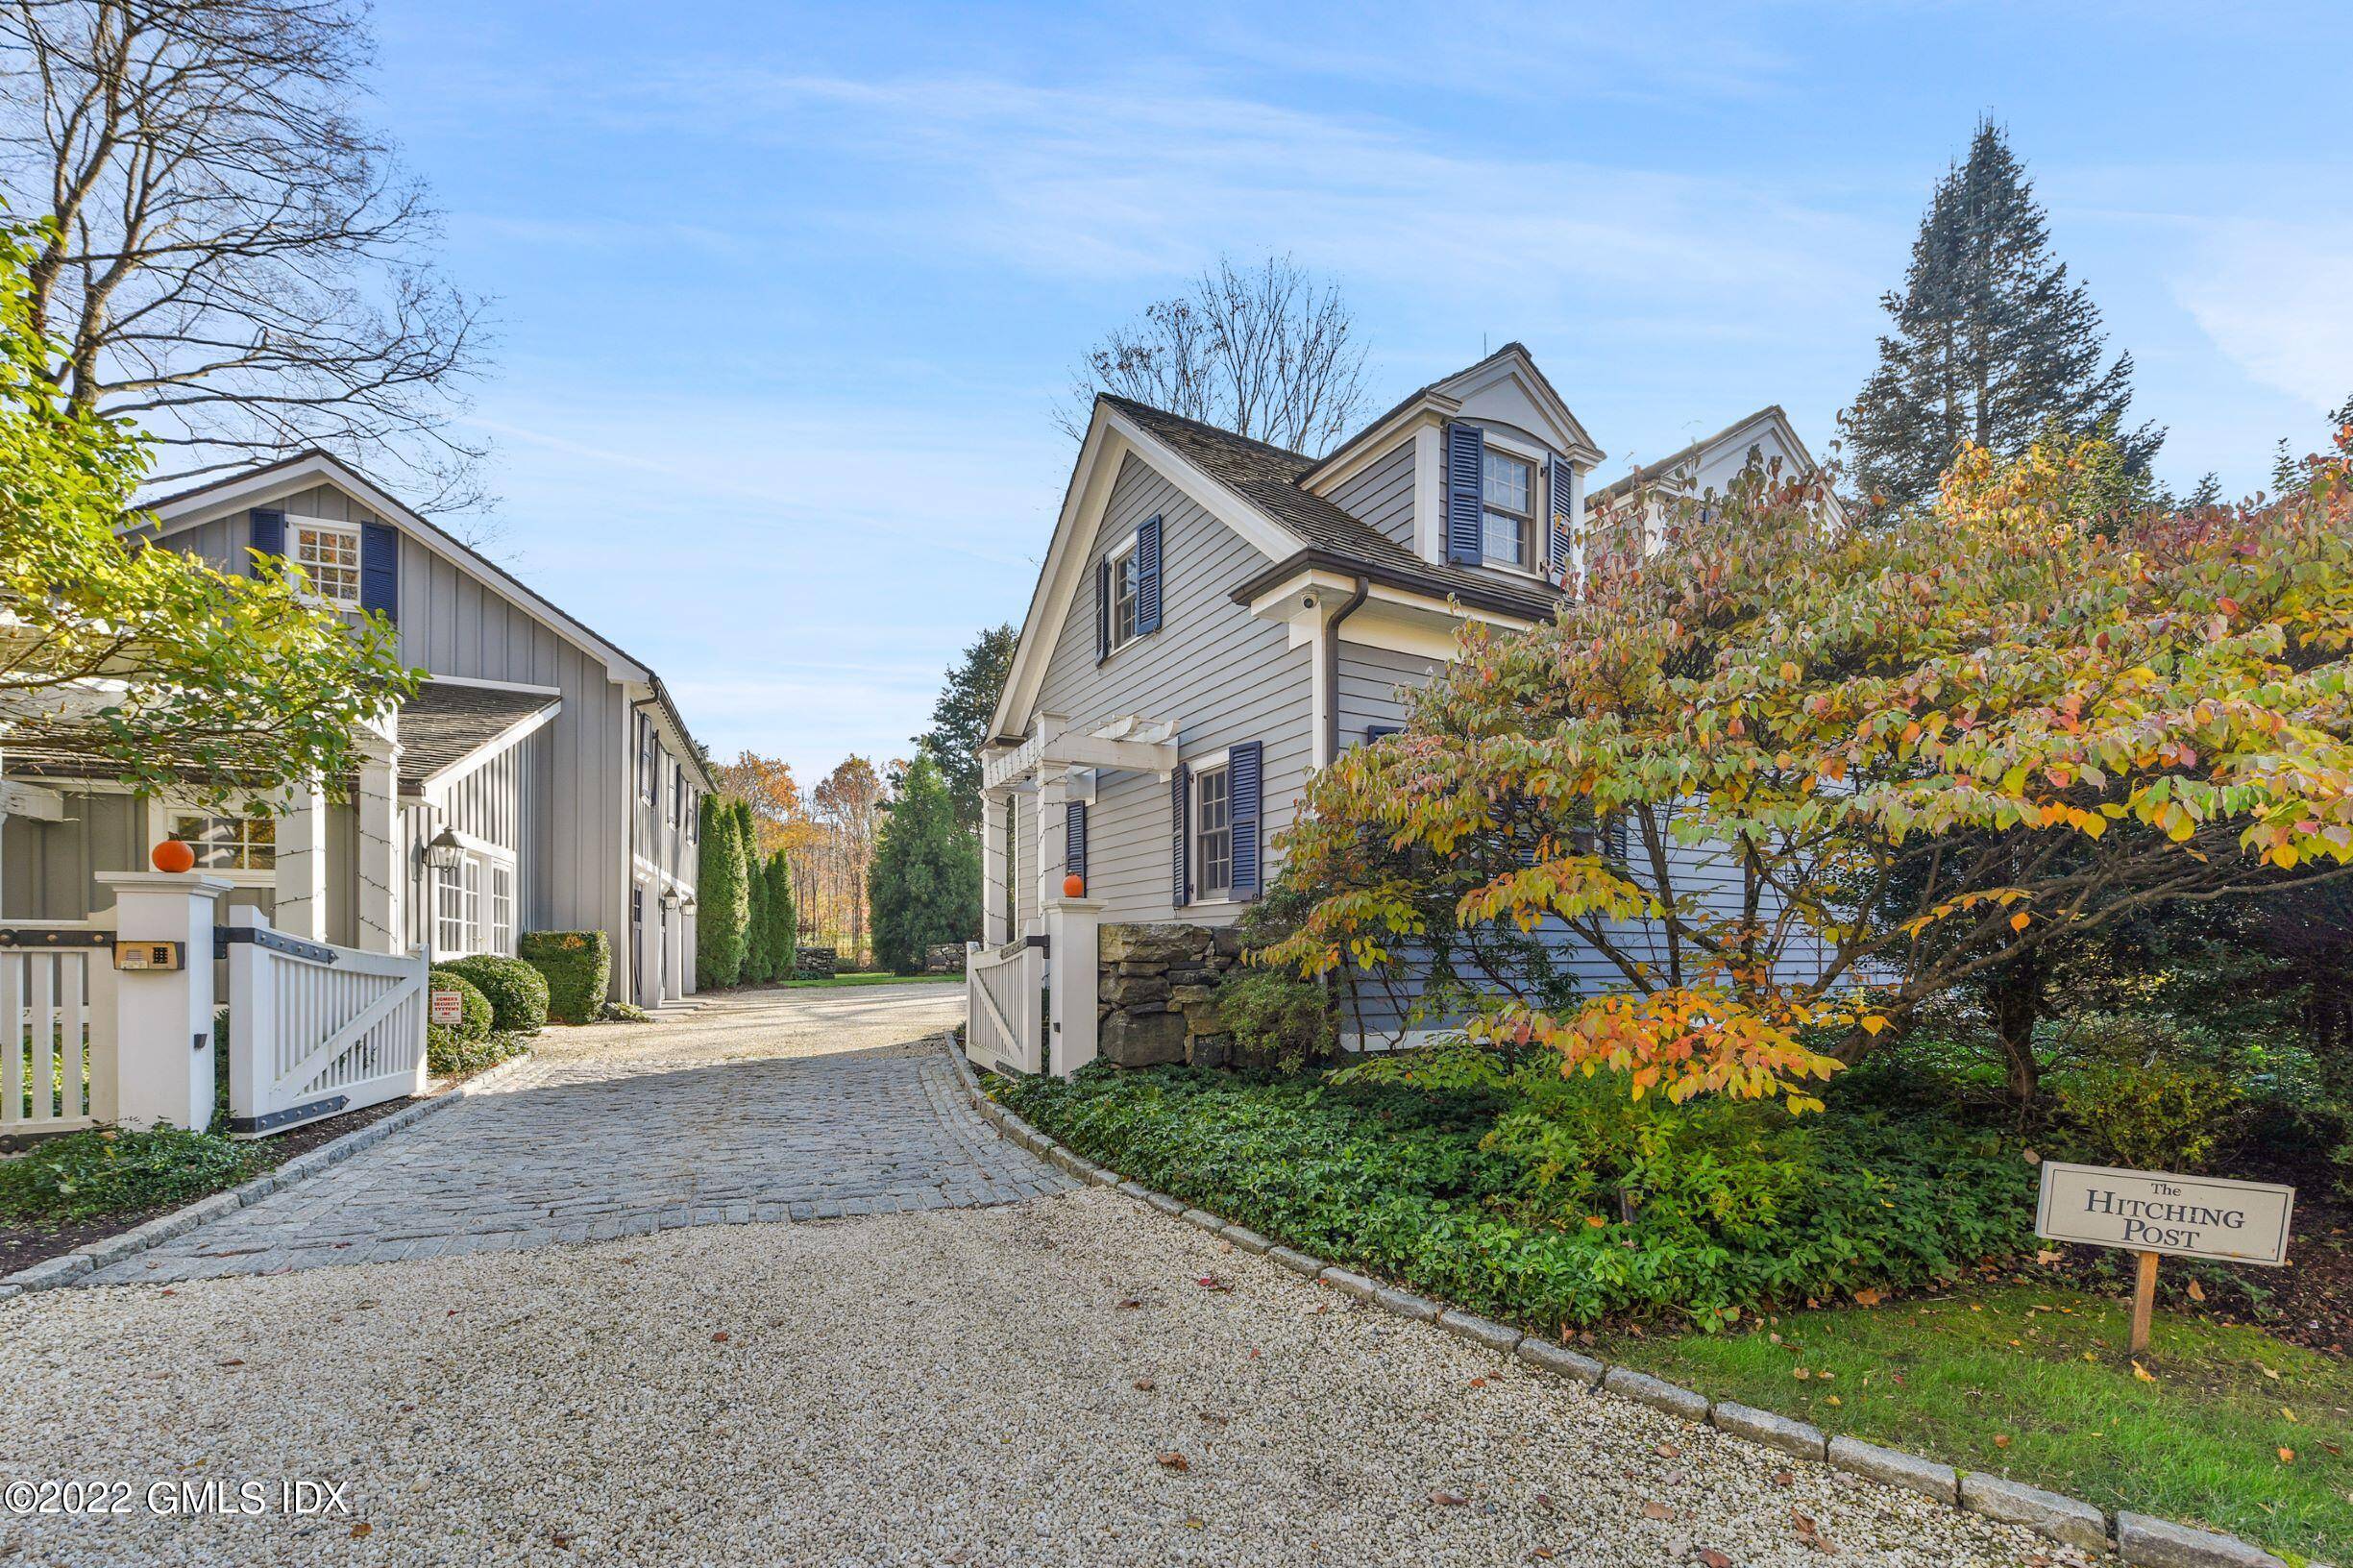 Rare opportunity to acquire an exceptional Greenwich farmhouse compound.